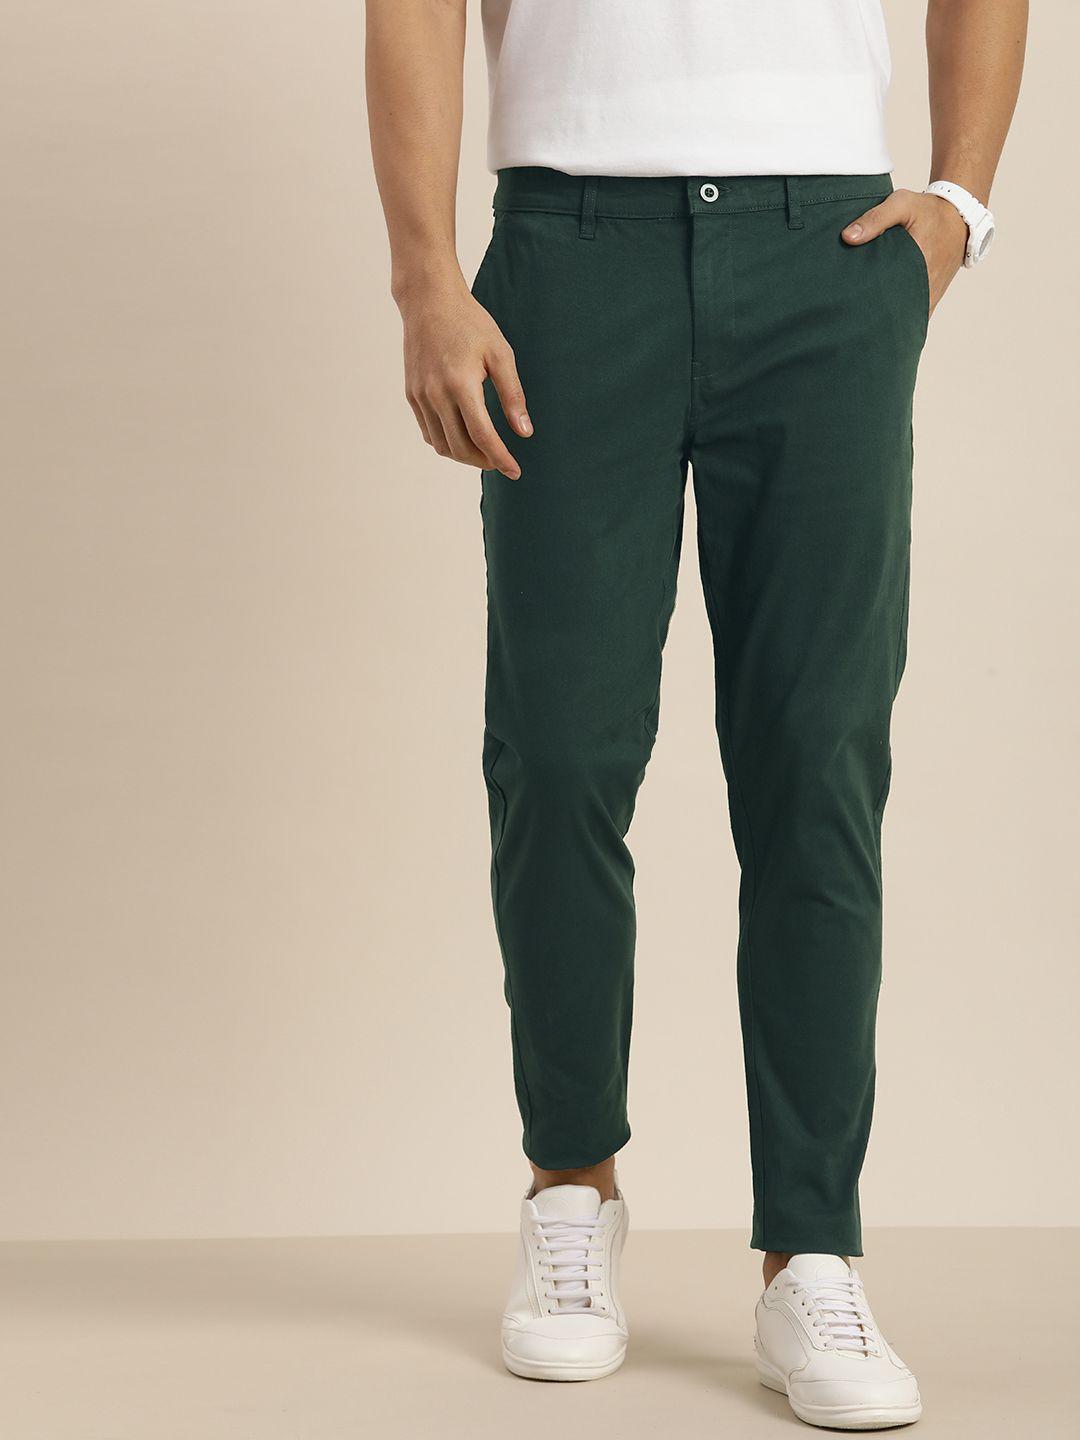 difference of opinion men solid chinos trousers